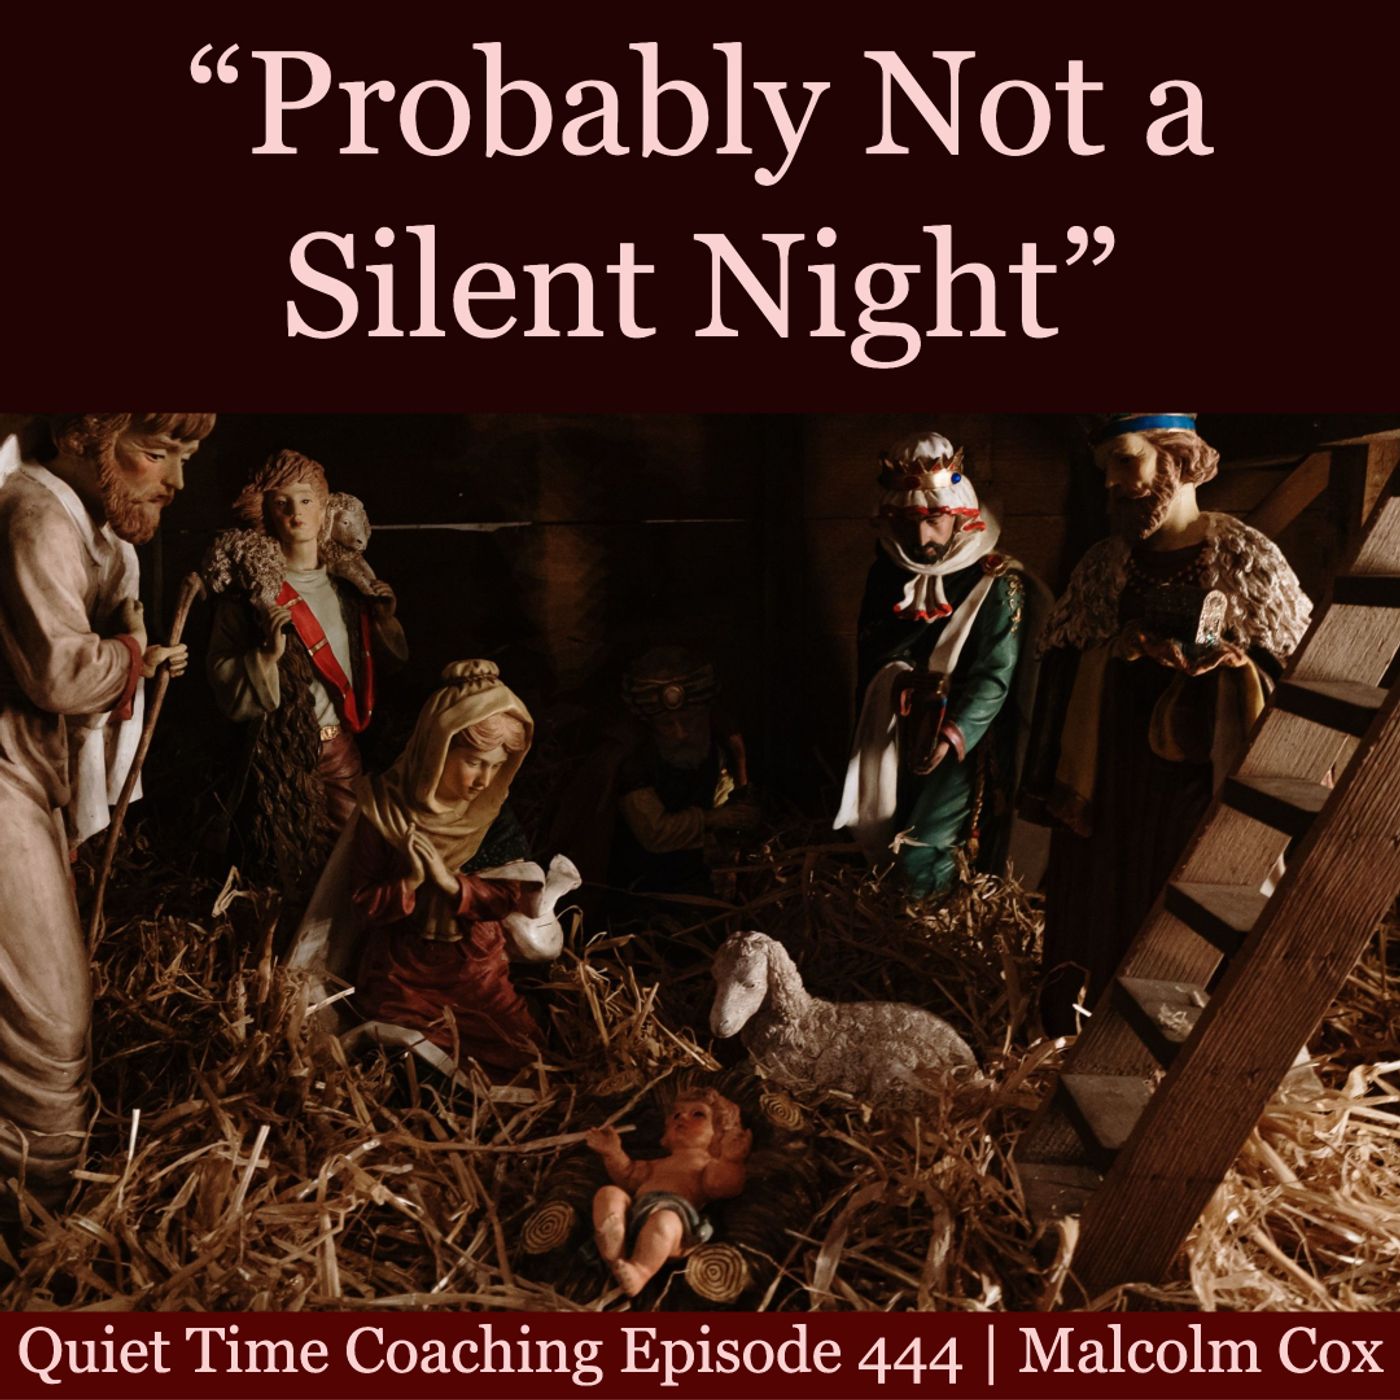 S2 Ep2142: Quiet Time Coaching Episode 444 | “Probably Not a Silent Night” | Malcolm Cox